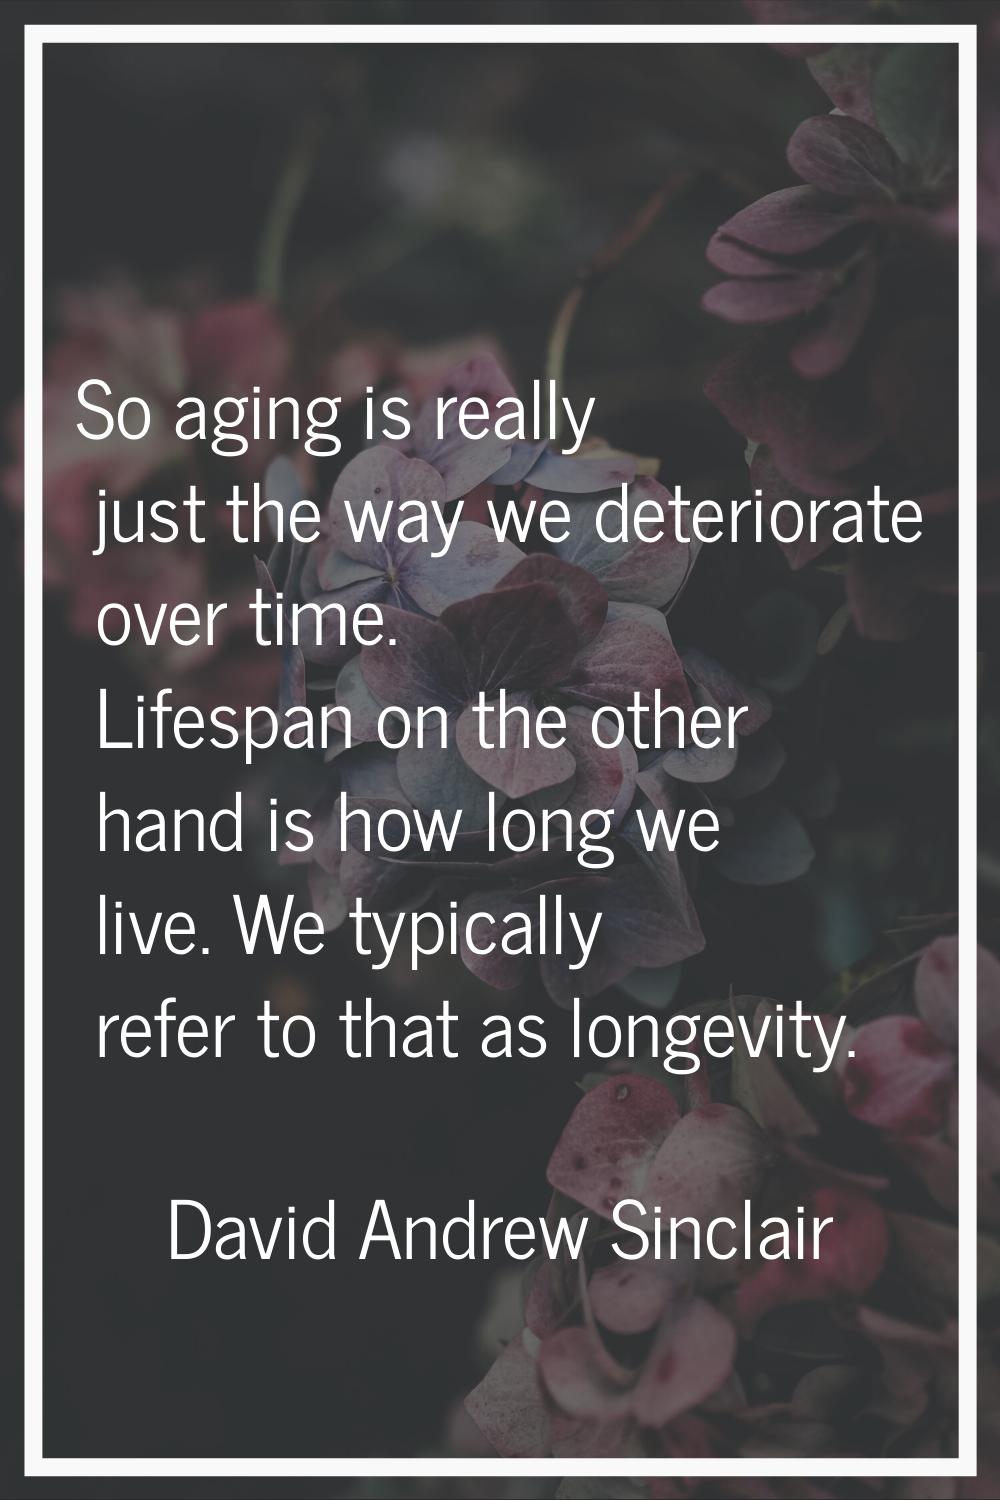 So aging is really just the way we deteriorate over time. Lifespan on the other hand is how long we